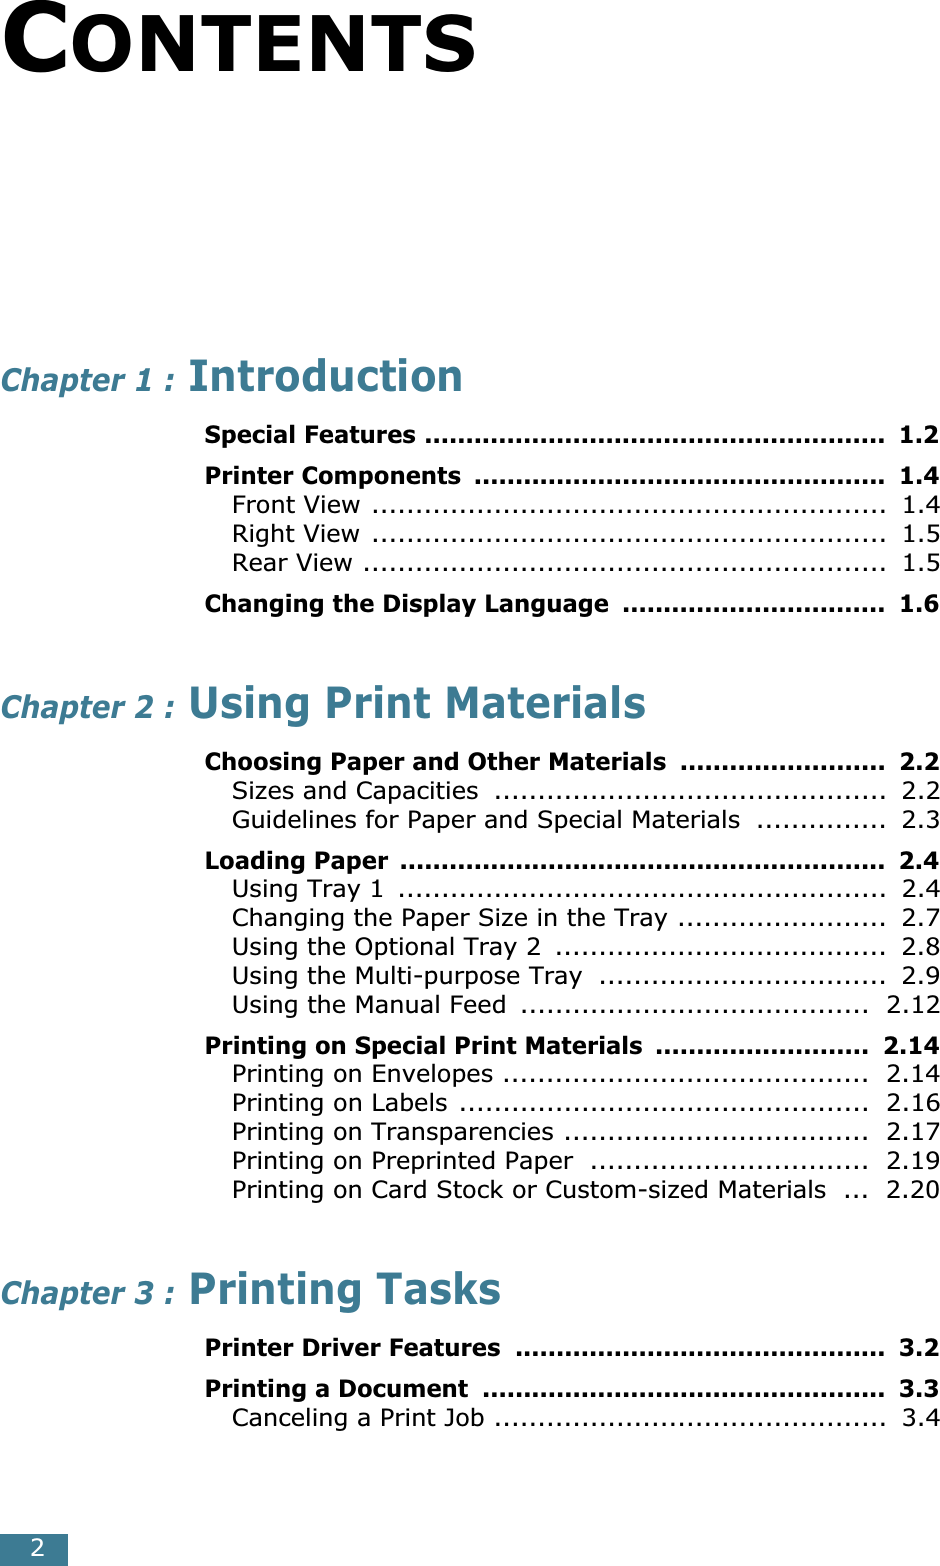  2 C ONTENTS Chapter 1 :  Introduction Special Features ........................................................  1.2Printer Components  ..................................................  1.4 Front View ...........................................................  1.4Right View ...........................................................  1.5Rear View ............................................................  1.5 Changing the Display Language  ................................  1.6 Chapter 2 :  Using Print Materials Choosing Paper and Other Materials  .........................  2.2 Sizes and Capacities  .............................................  2.2Guidelines for Paper and Special Materials  ...............  2.3 Loading Paper  ...........................................................  2.4 Using Tray 1  ........................................................  2.4Changing the Paper Size in the Tray ........................  2.7Using the Optional Tray 2  ......................................  2.8Using the Multi-purpose Tray  .................................  2.9Using the Manual Feed  ........................................  2.12 Printing on Special Print Materials  ..........................  2.14 Printing on Envelopes ..........................................  2.14Printing on Labels ...............................................  2.16Printing on Transparencies ...................................  2.17Printing on Preprinted Paper  ................................  2.19Printing on Card Stock or Custom-sized Materials  ...  2.20 Chapter 3 :  Printing Tasks Printer Driver Features  .............................................  3.2Printing a Document  .................................................  3.3 Canceling a Print Job .............................................  3.4